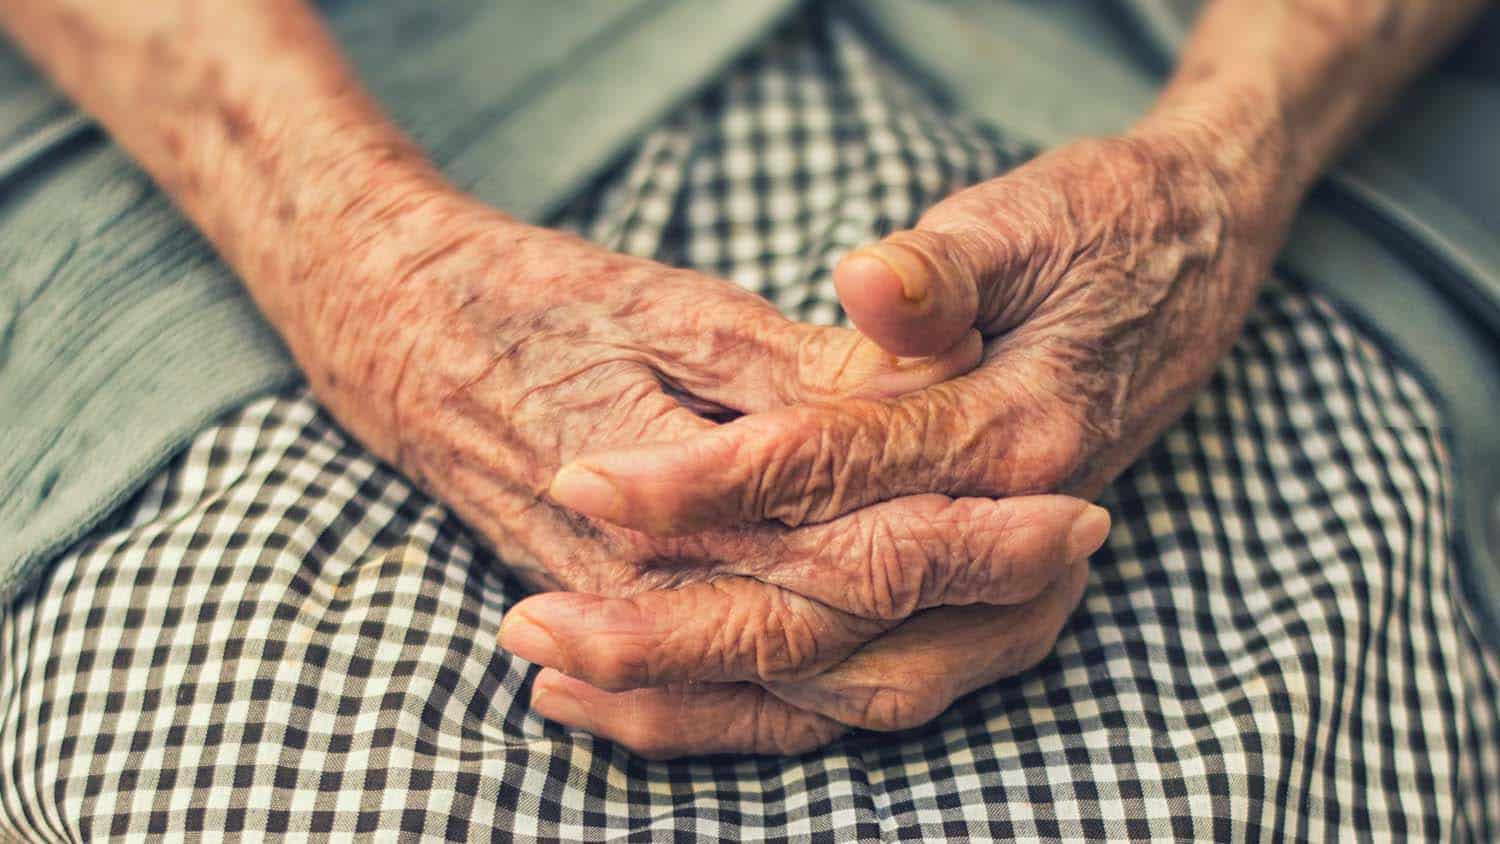 A person's aged hands are crossed and sit on their lap.